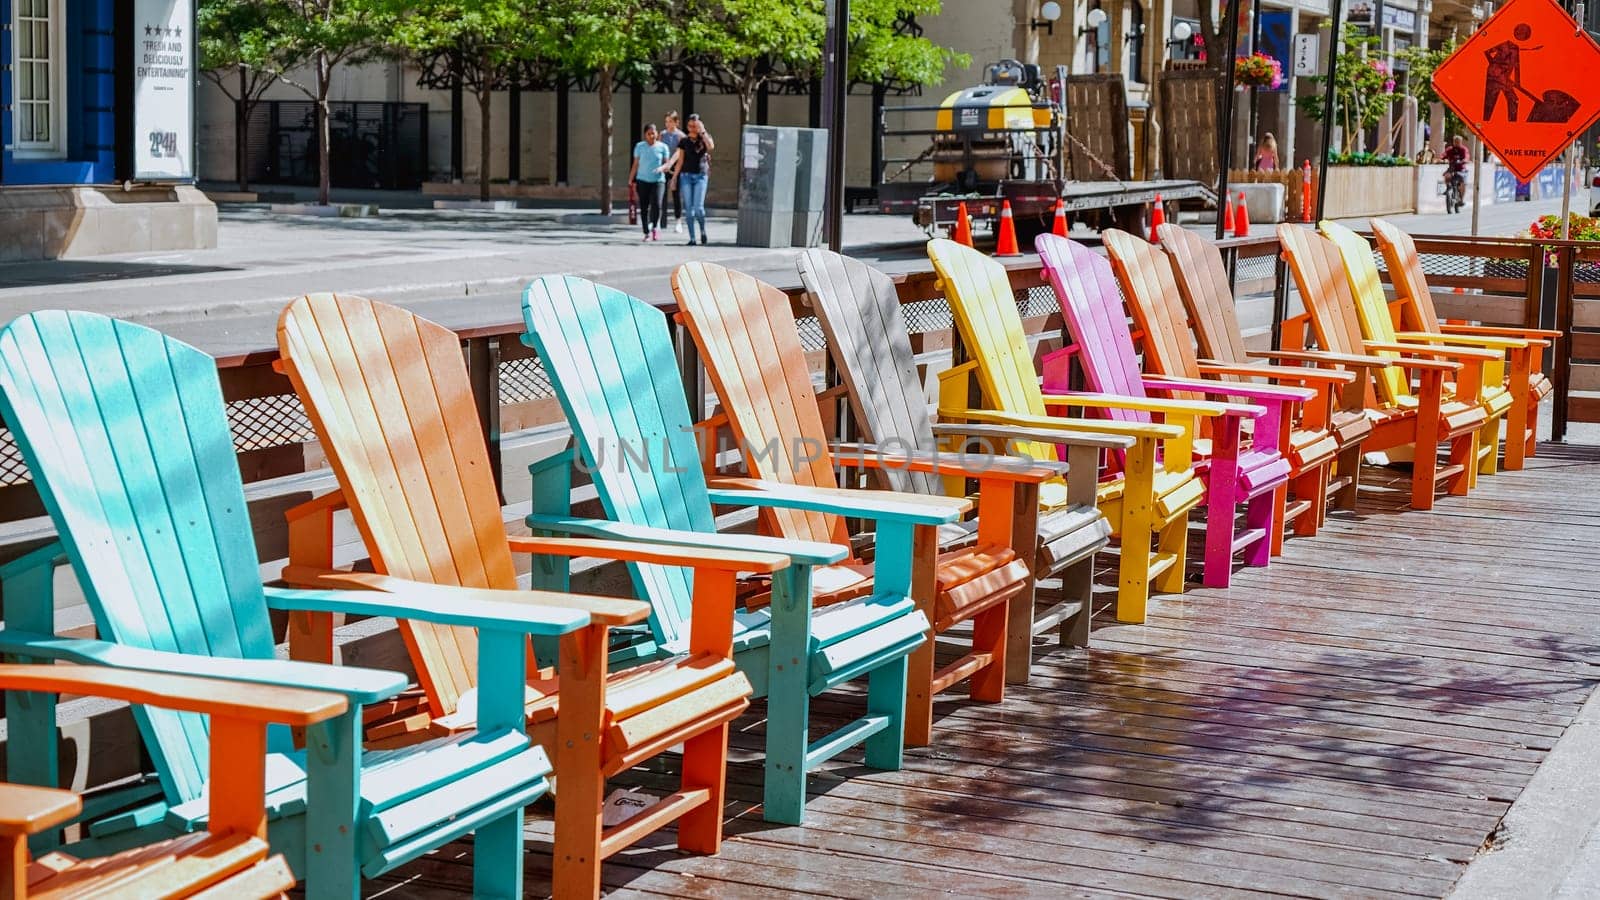 Colorful chairs on King street in front of International Film Festival building. Toronto, Canada - July 4, 2022.